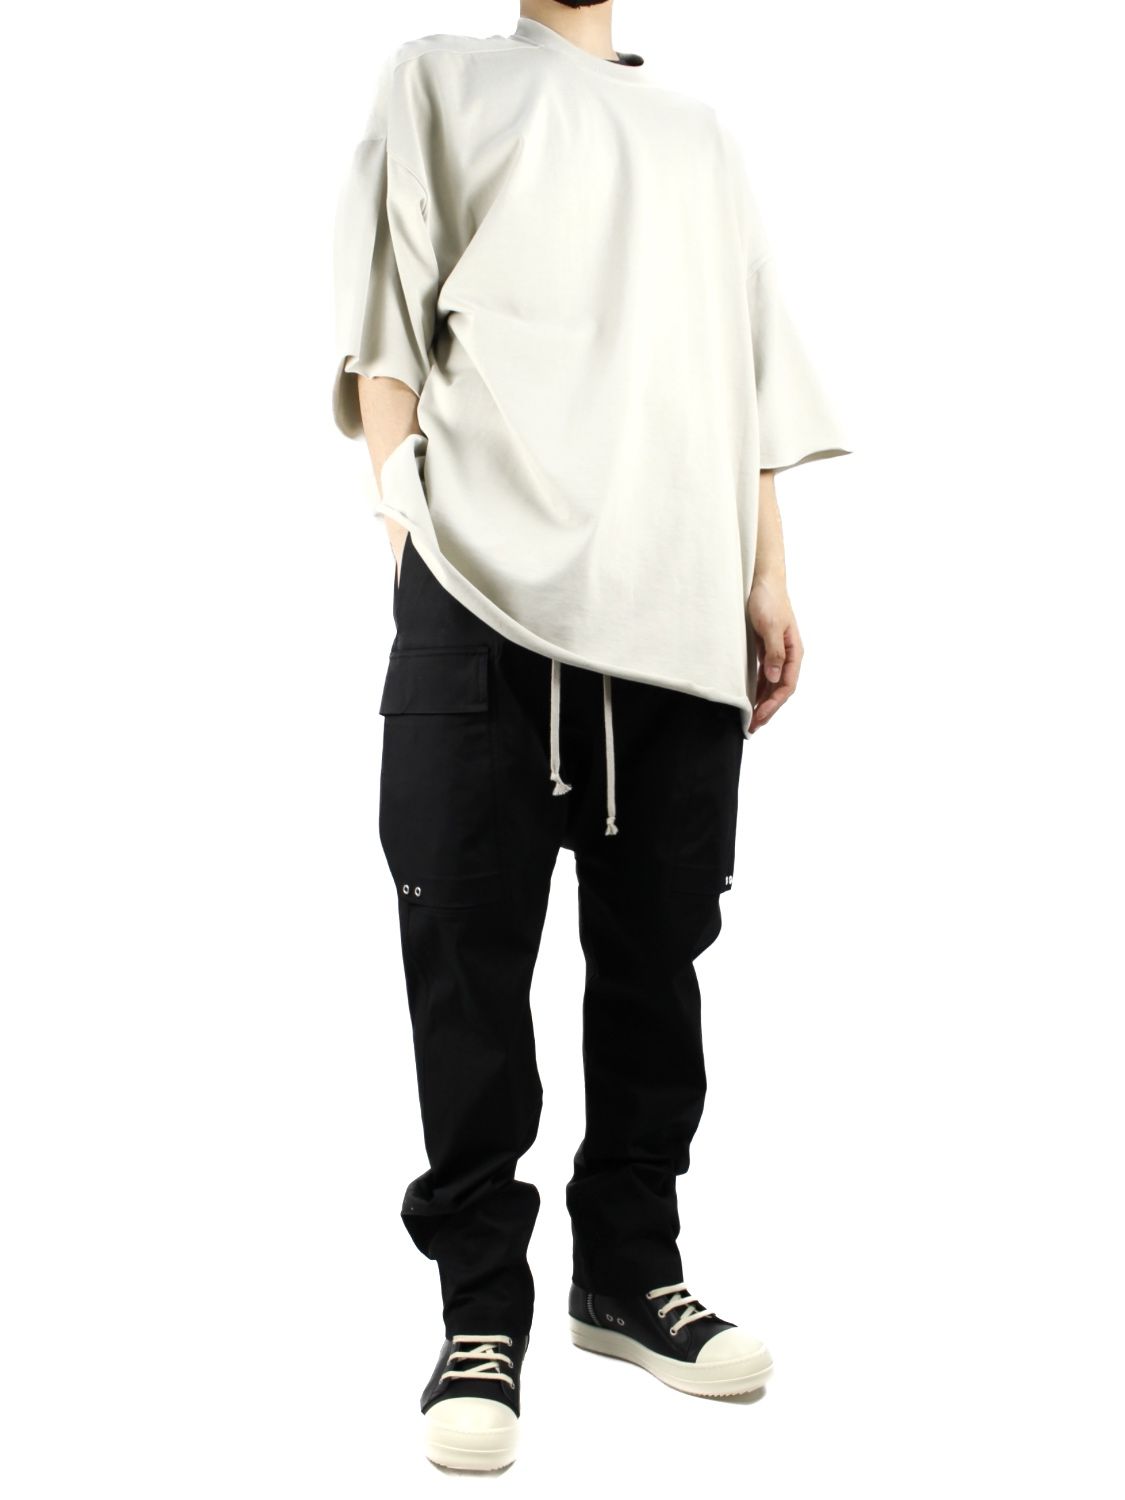 RICK OWENS - 【23SS】半袖 トミー スーパービッグ Tシャツ / TOMMY T